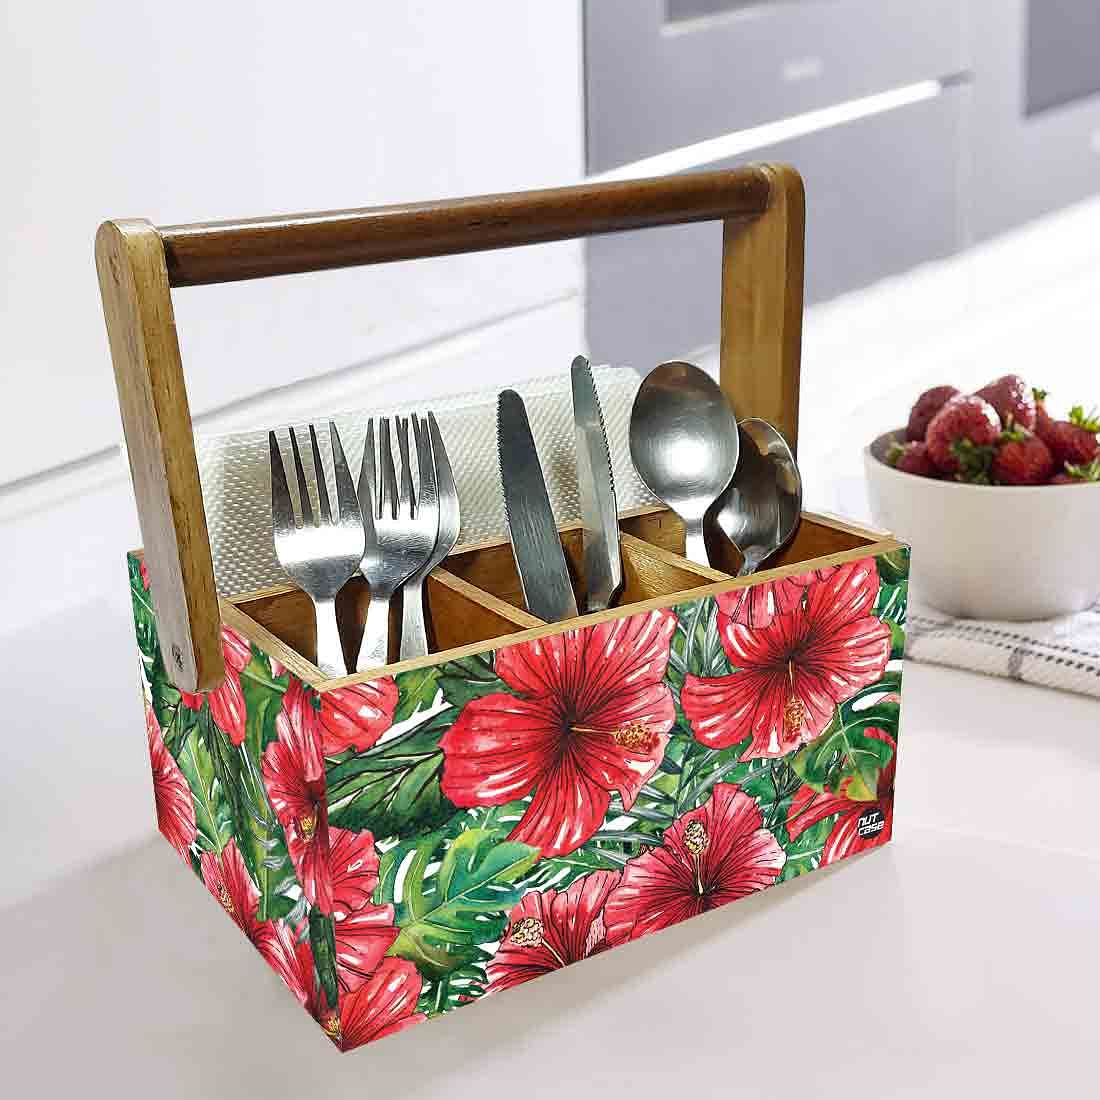 Spoon Stand Wooden for Kitchen Organizer Knives Napkin Forks - Hibiscus Nutcase